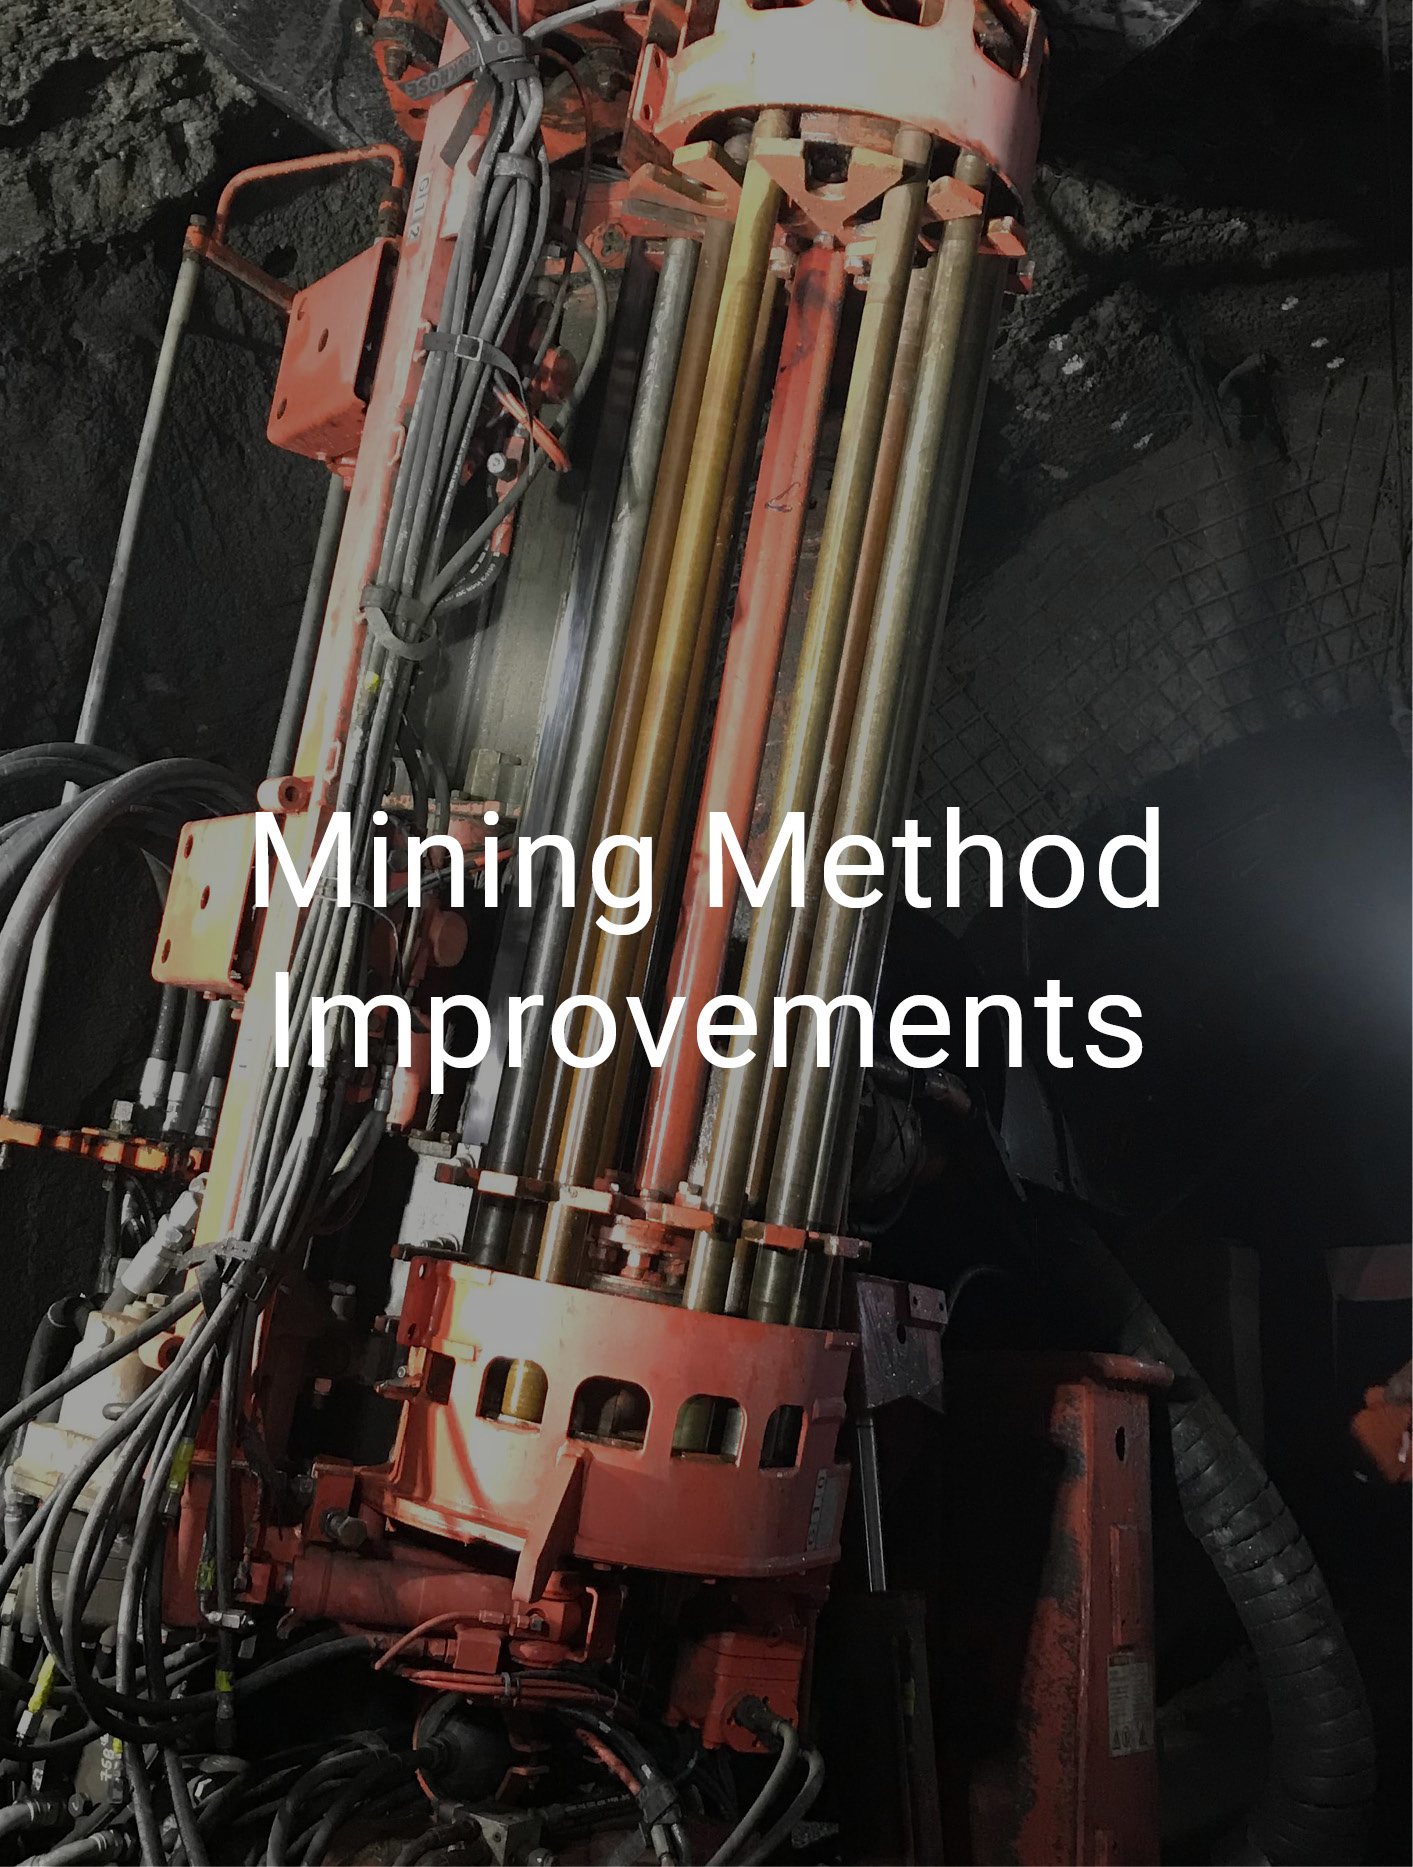 text 'Mining Method Improvements' over background of mining equipment